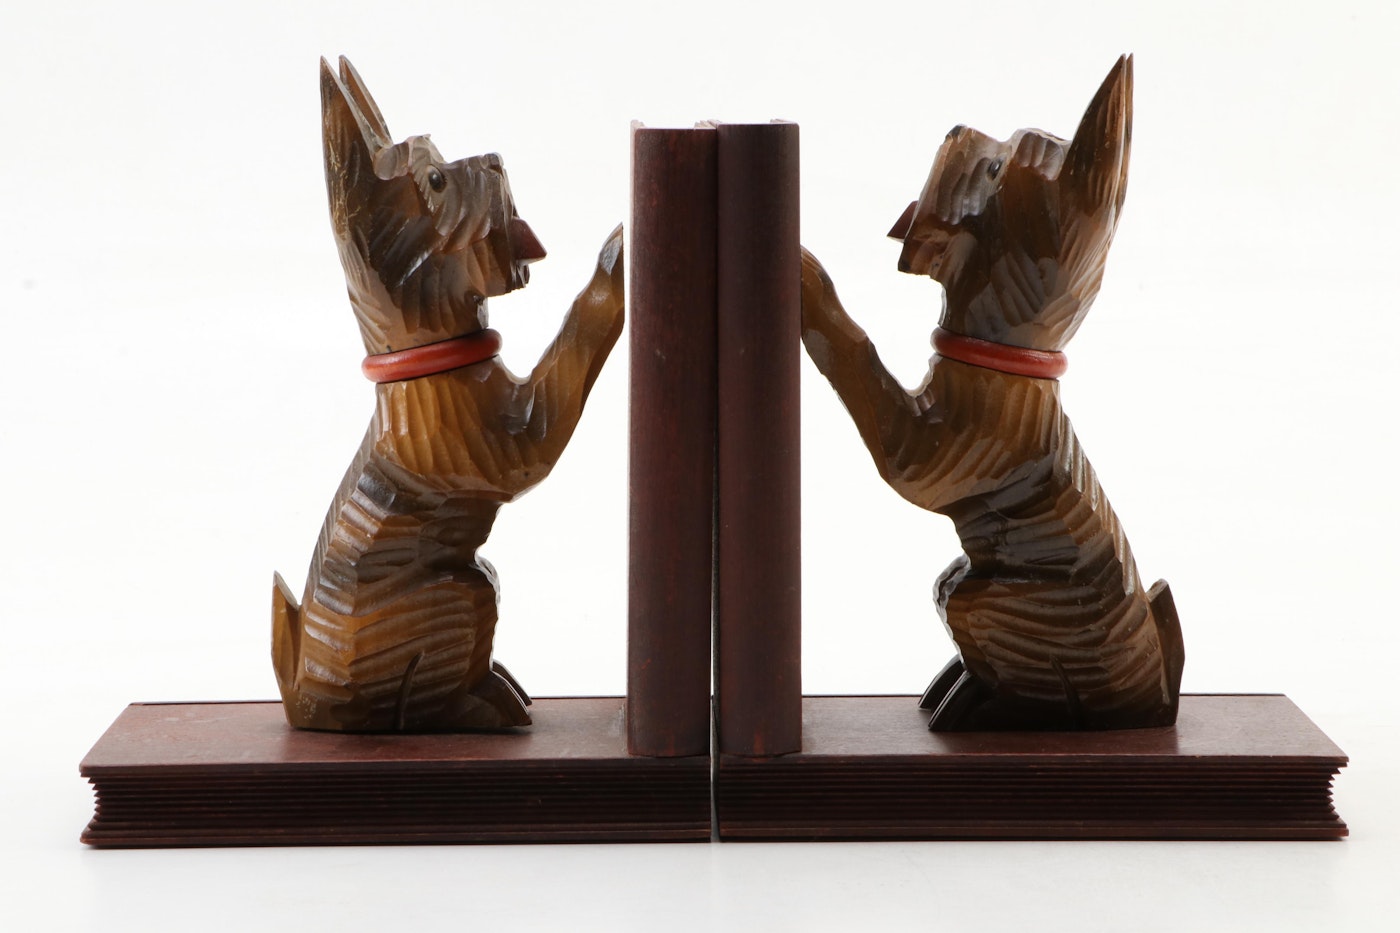 Pair of Carved Wood Schnauzer Puppy Bookends | EBTH